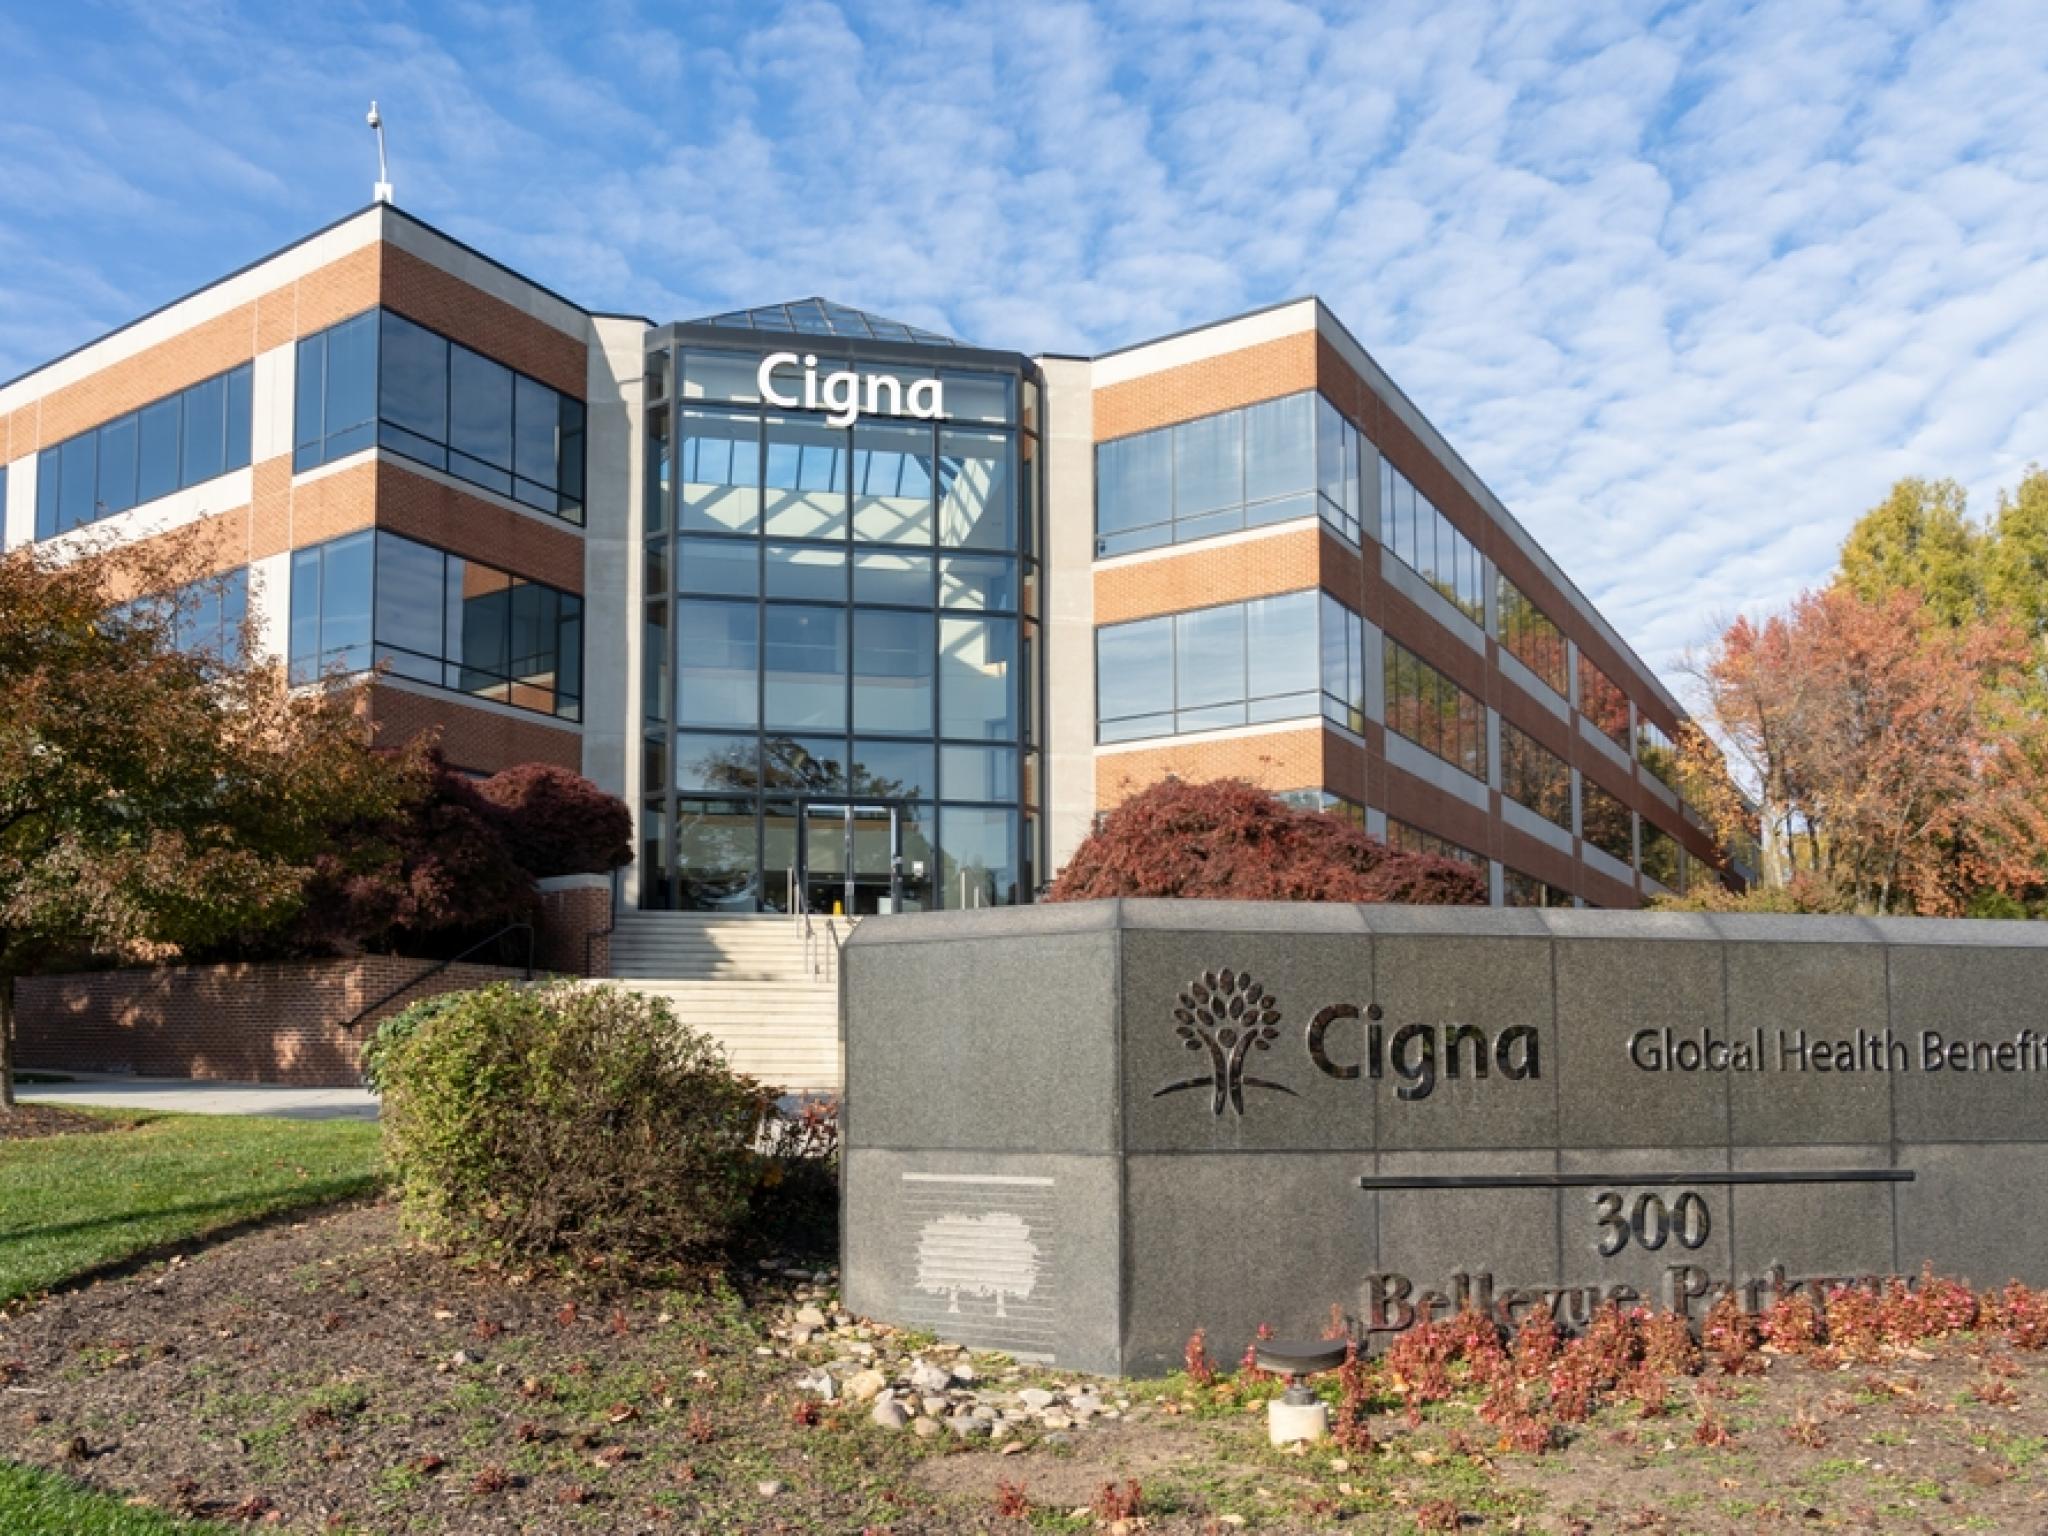  cignas-specialty-pharmacy-leadership-expected-to-drive-long-term-eps-growth-analyst-says 